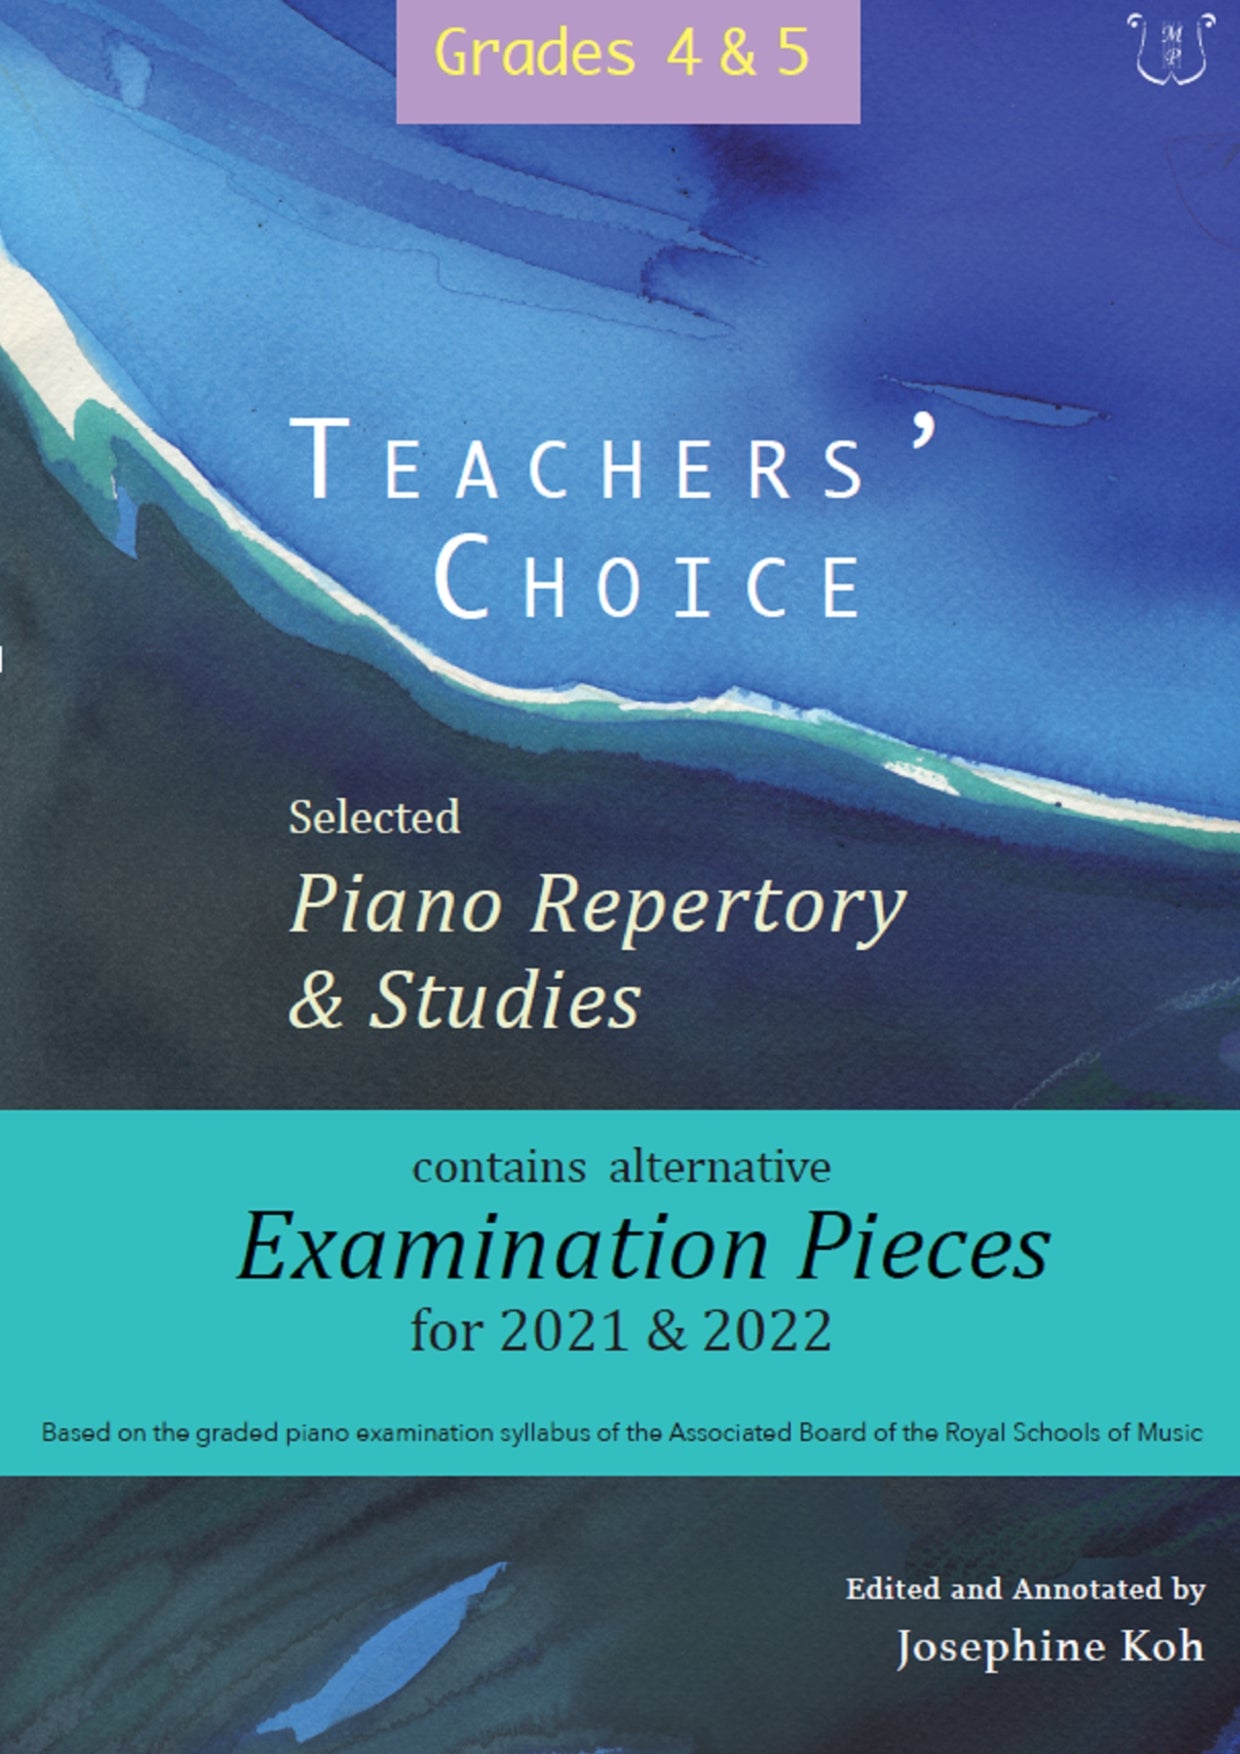 Teachers’ Choice Selected Piano Repertory and Studies 2021 & 2022 Grades 4 & 5